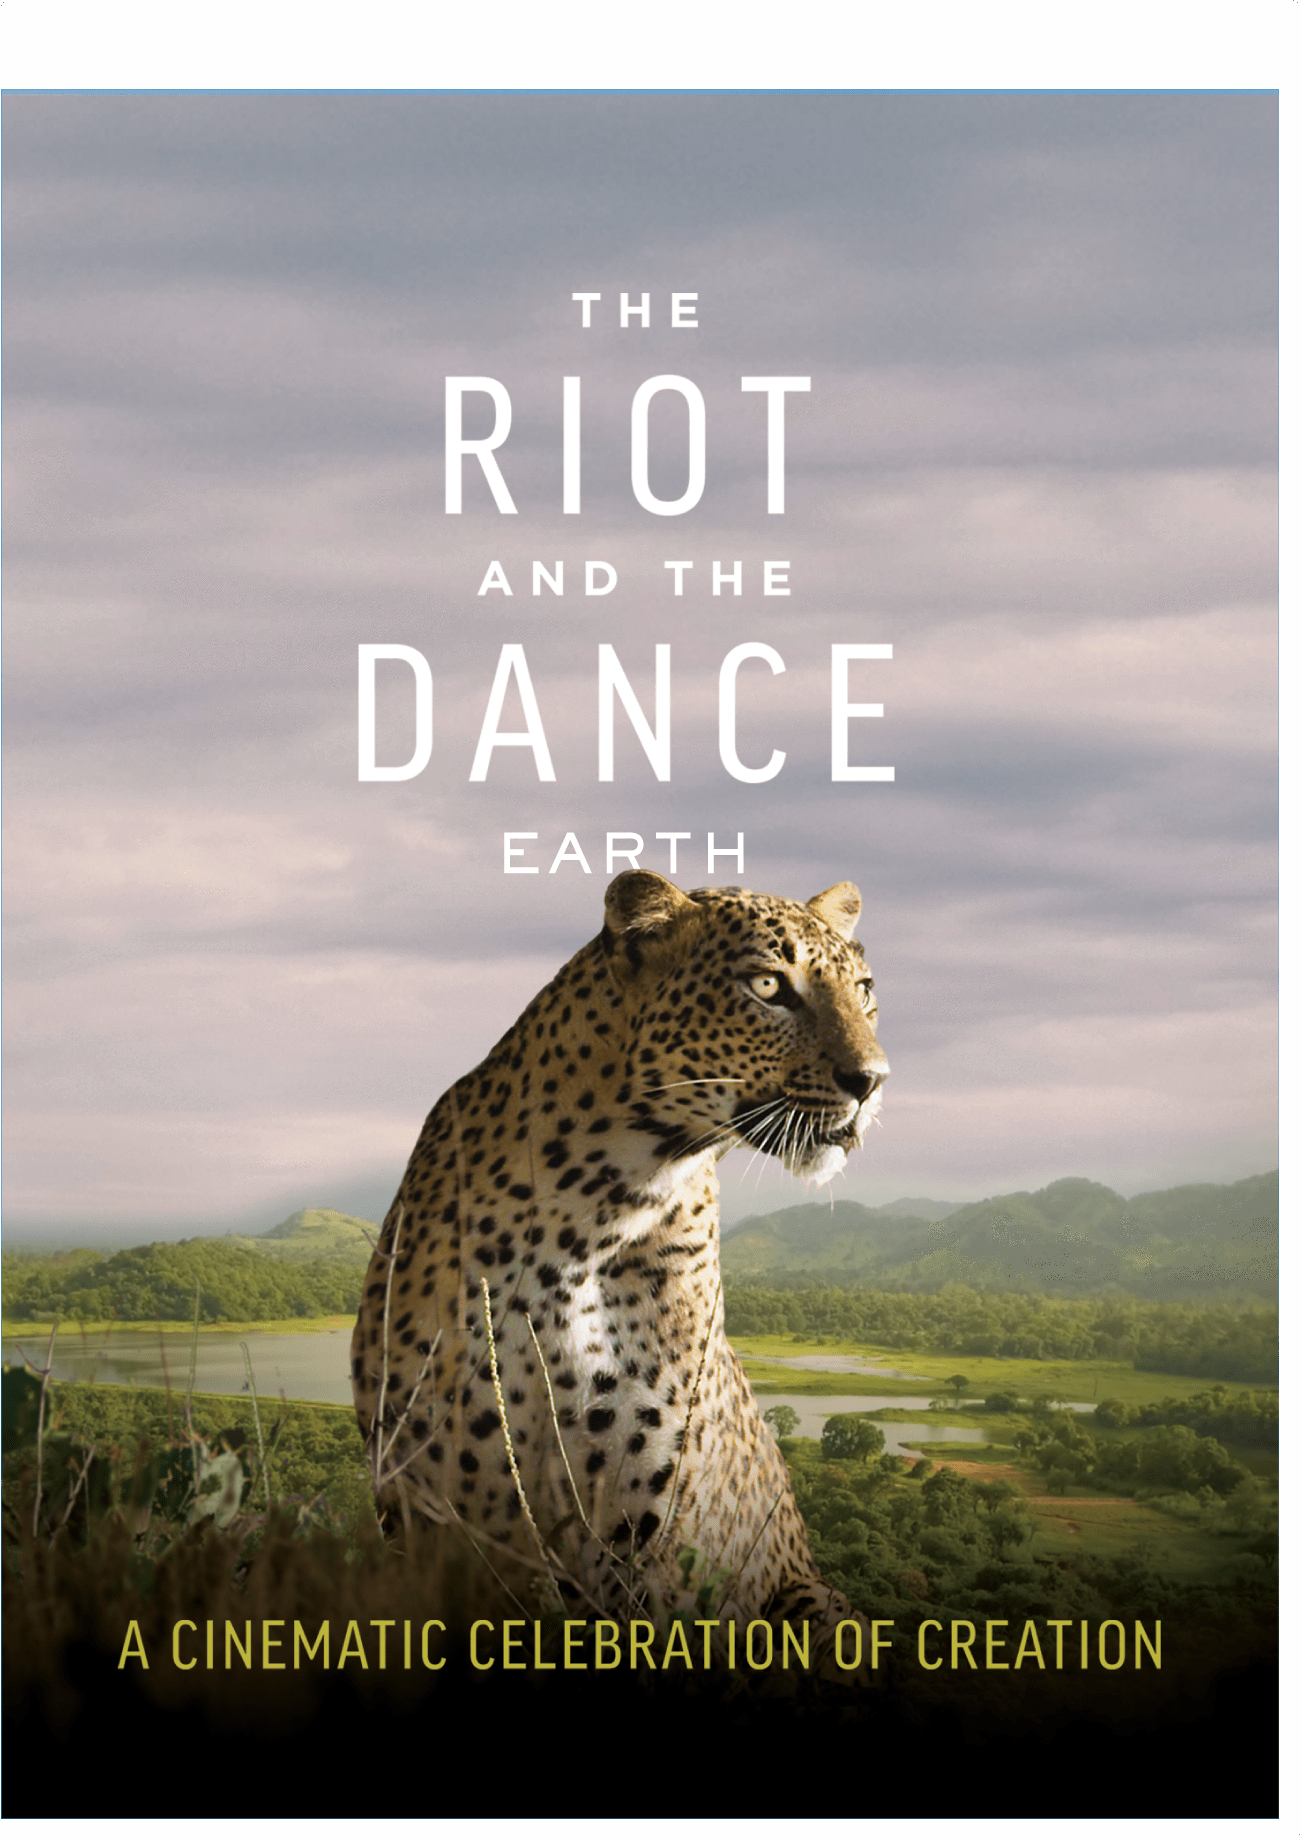 the-riot-and-the-dance-blu-ray-canon-press-reviews-on-judge-me